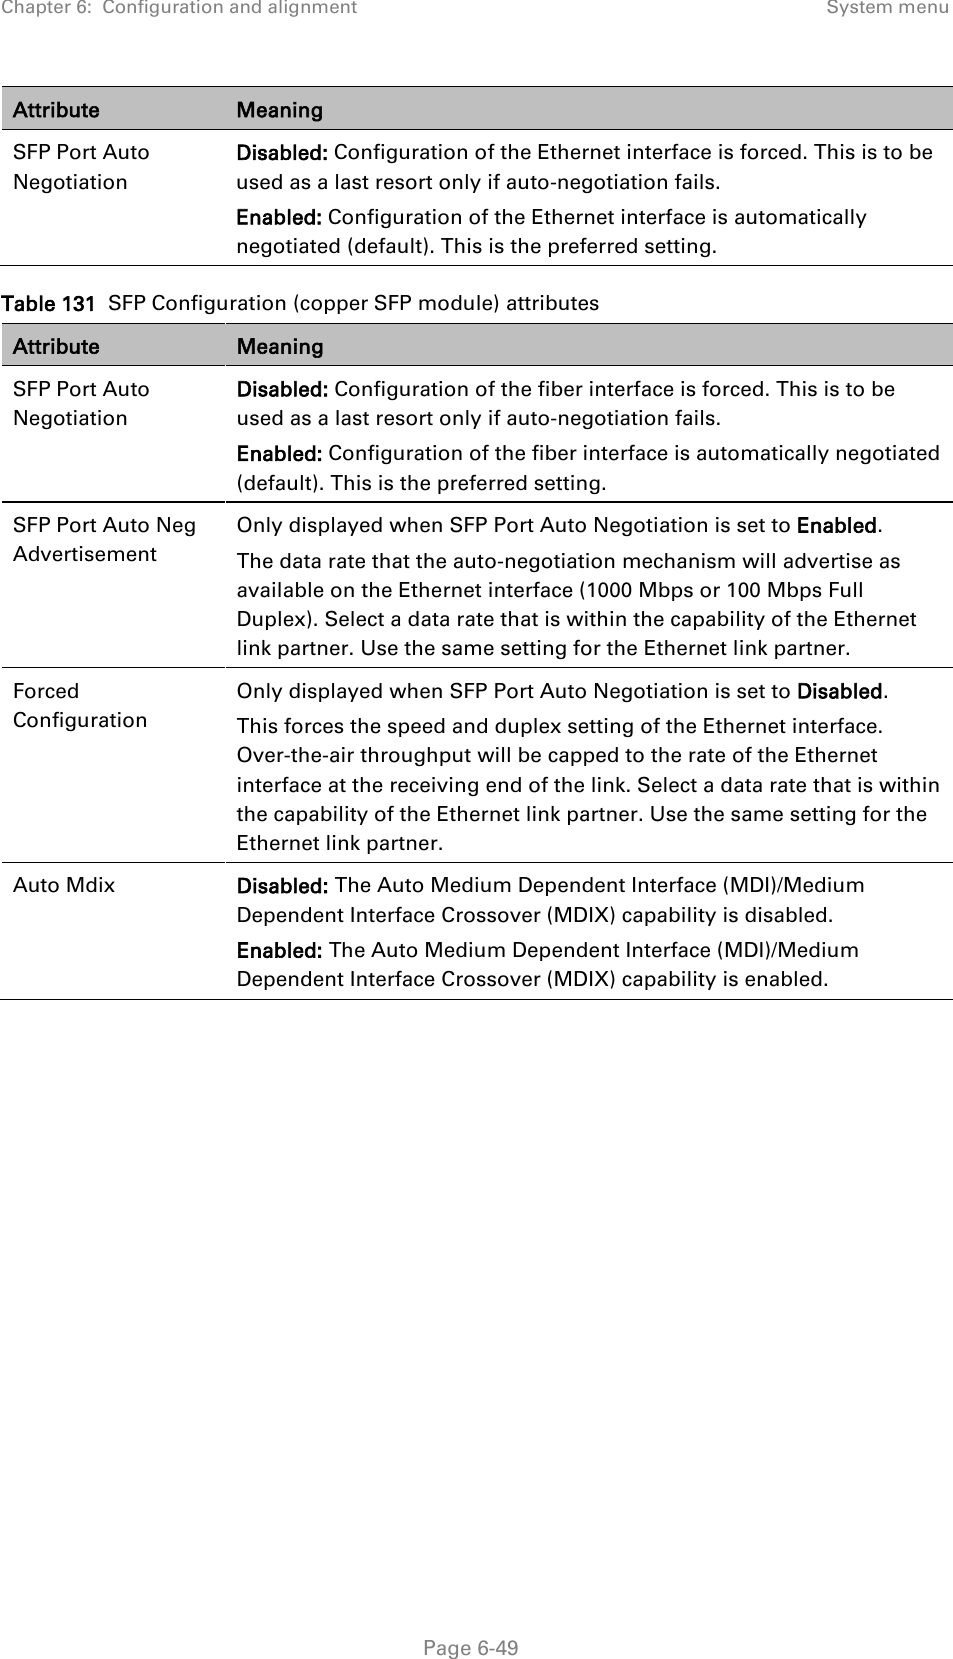 Chapter 6:  Configuration and alignment System menu  Attribute Meaning SFP Port Auto Negotiation Disabled: Configuration of the Ethernet interface is forced. This is to be used as a last resort only if auto-negotiation fails. Enabled: Configuration of the Ethernet interface is automatically negotiated (default). This is the preferred setting. Table 131  SFP Configuration (copper SFP module) attributes Attribute Meaning SFP Port Auto Negotiation Disabled: Configuration of the fiber interface is forced. This is to be used as a last resort only if auto-negotiation fails. Enabled: Configuration of the fiber interface is automatically negotiated (default). This is the preferred setting. SFP Port Auto Neg Advertisement Only displayed when SFP Port Auto Negotiation is set to Enabled. The data rate that the auto-negotiation mechanism will advertise as available on the Ethernet interface (1000 Mbps or 100 Mbps Full Duplex). Select a data rate that is within the capability of the Ethernet link partner. Use the same setting for the Ethernet link partner. Forced Configuration Only displayed when SFP Port Auto Negotiation is set to Disabled. This forces the speed and duplex setting of the Ethernet interface. Over-the-air throughput will be capped to the rate of the Ethernet interface at the receiving end of the link. Select a data rate that is within the capability of the Ethernet link partner. Use the same setting for the Ethernet link partner. Auto Mdix Disabled: The Auto Medium Dependent Interface (MDI)/Medium Dependent Interface Crossover (MDIX) capability is disabled. Enabled: The Auto Medium Dependent Interface (MDI)/Medium Dependent Interface Crossover (MDIX) capability is enabled.      Page 6-49 